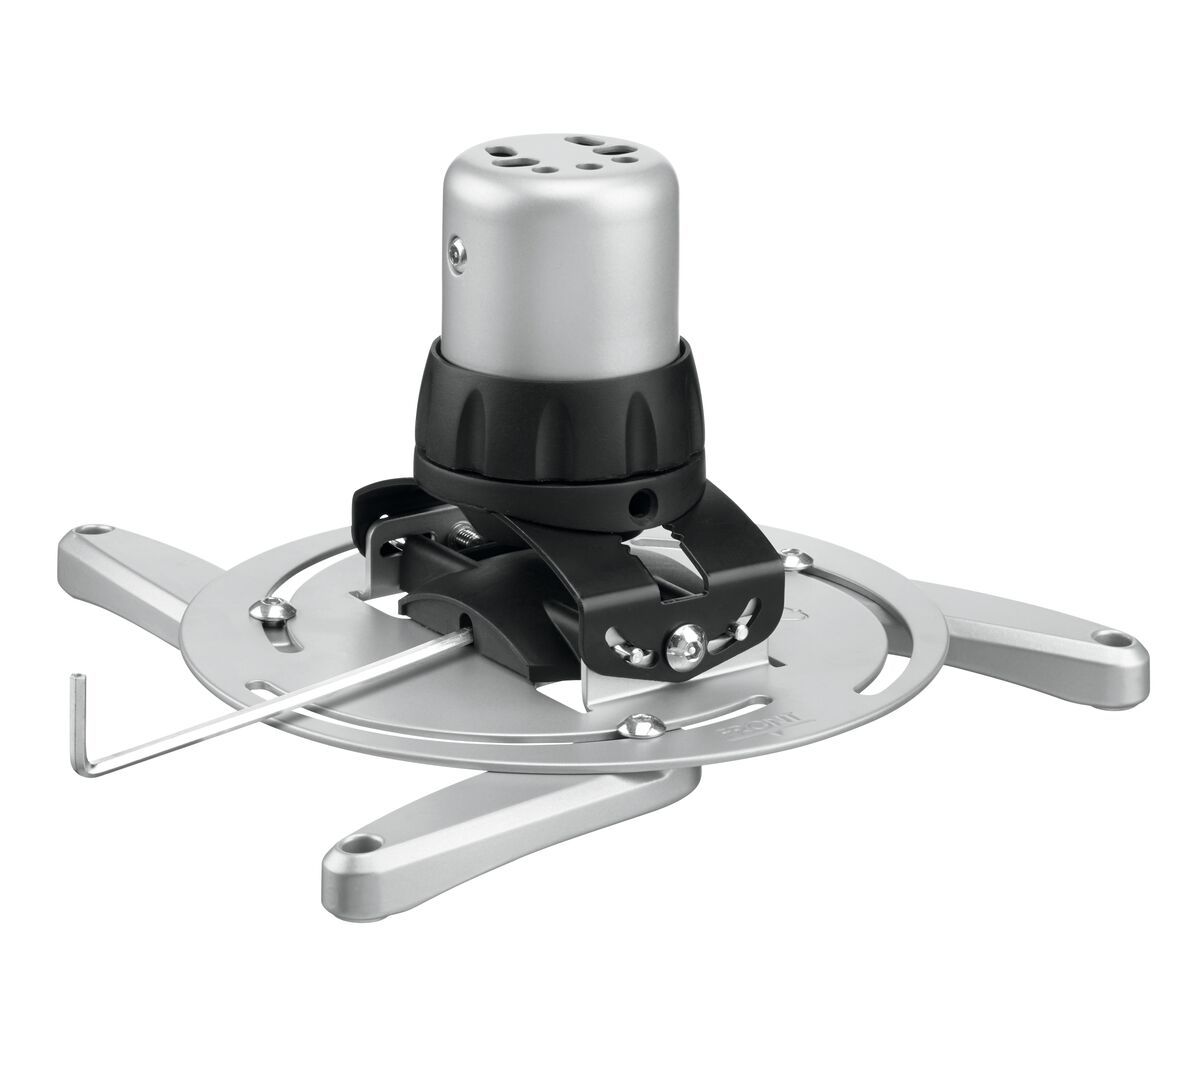 Vogel's PPC 1500 Projector Ceiling Mount (white) - Detail